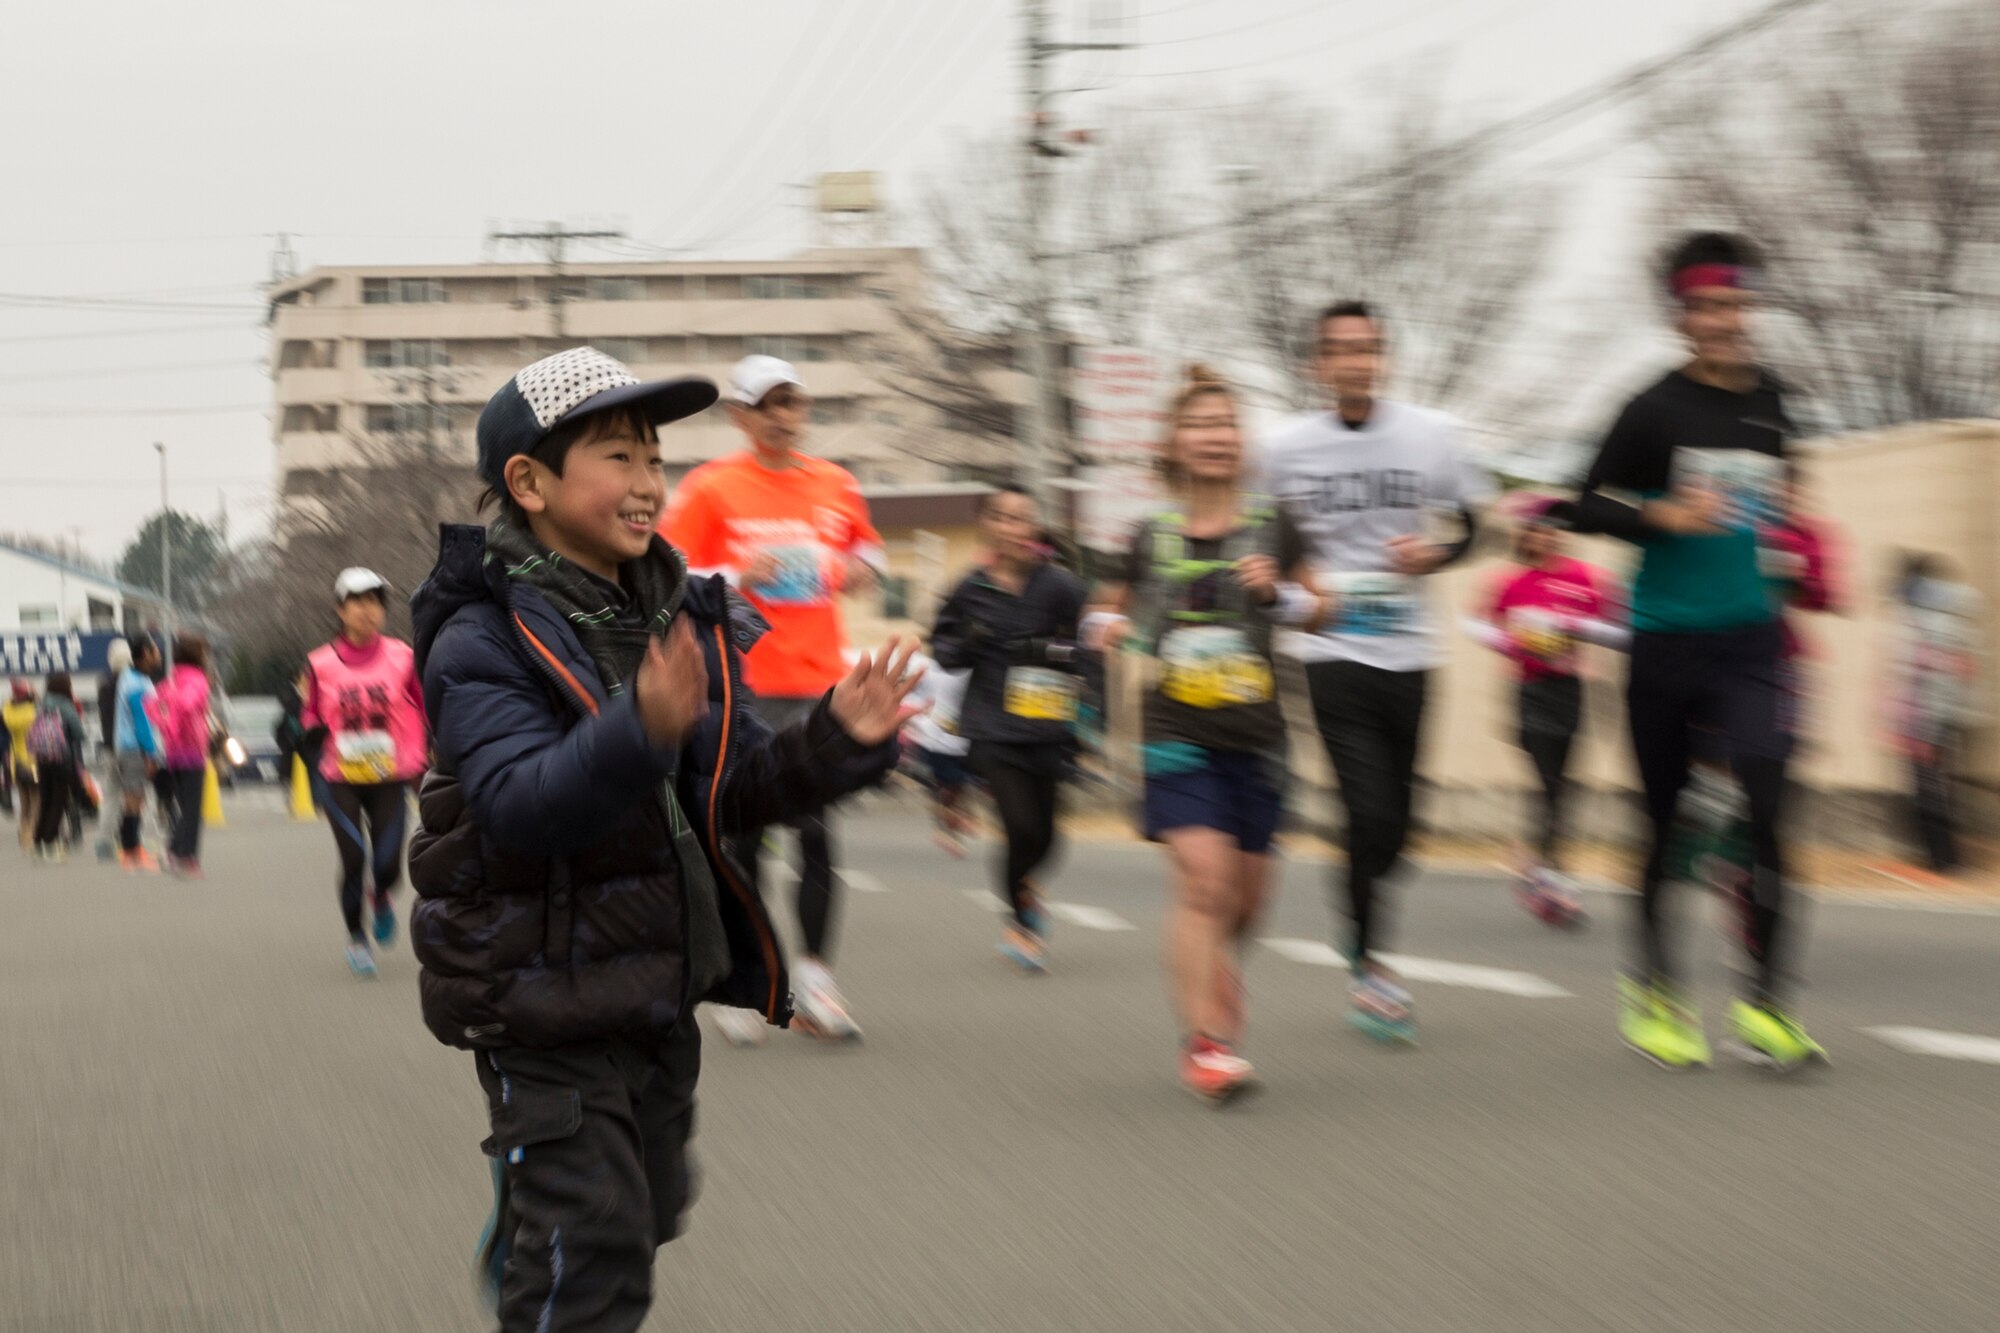 A child encourages participants during the 35th Annual Frostbite Run at Yokota Air Base, Japan, Jan. 17, 2016. Yokota hosted over 9,000 participants for the event.  Akio Tsukamoto won first place by 1:11:05. (U.S. Air Force photo by Osakabe Yasuo/Released)